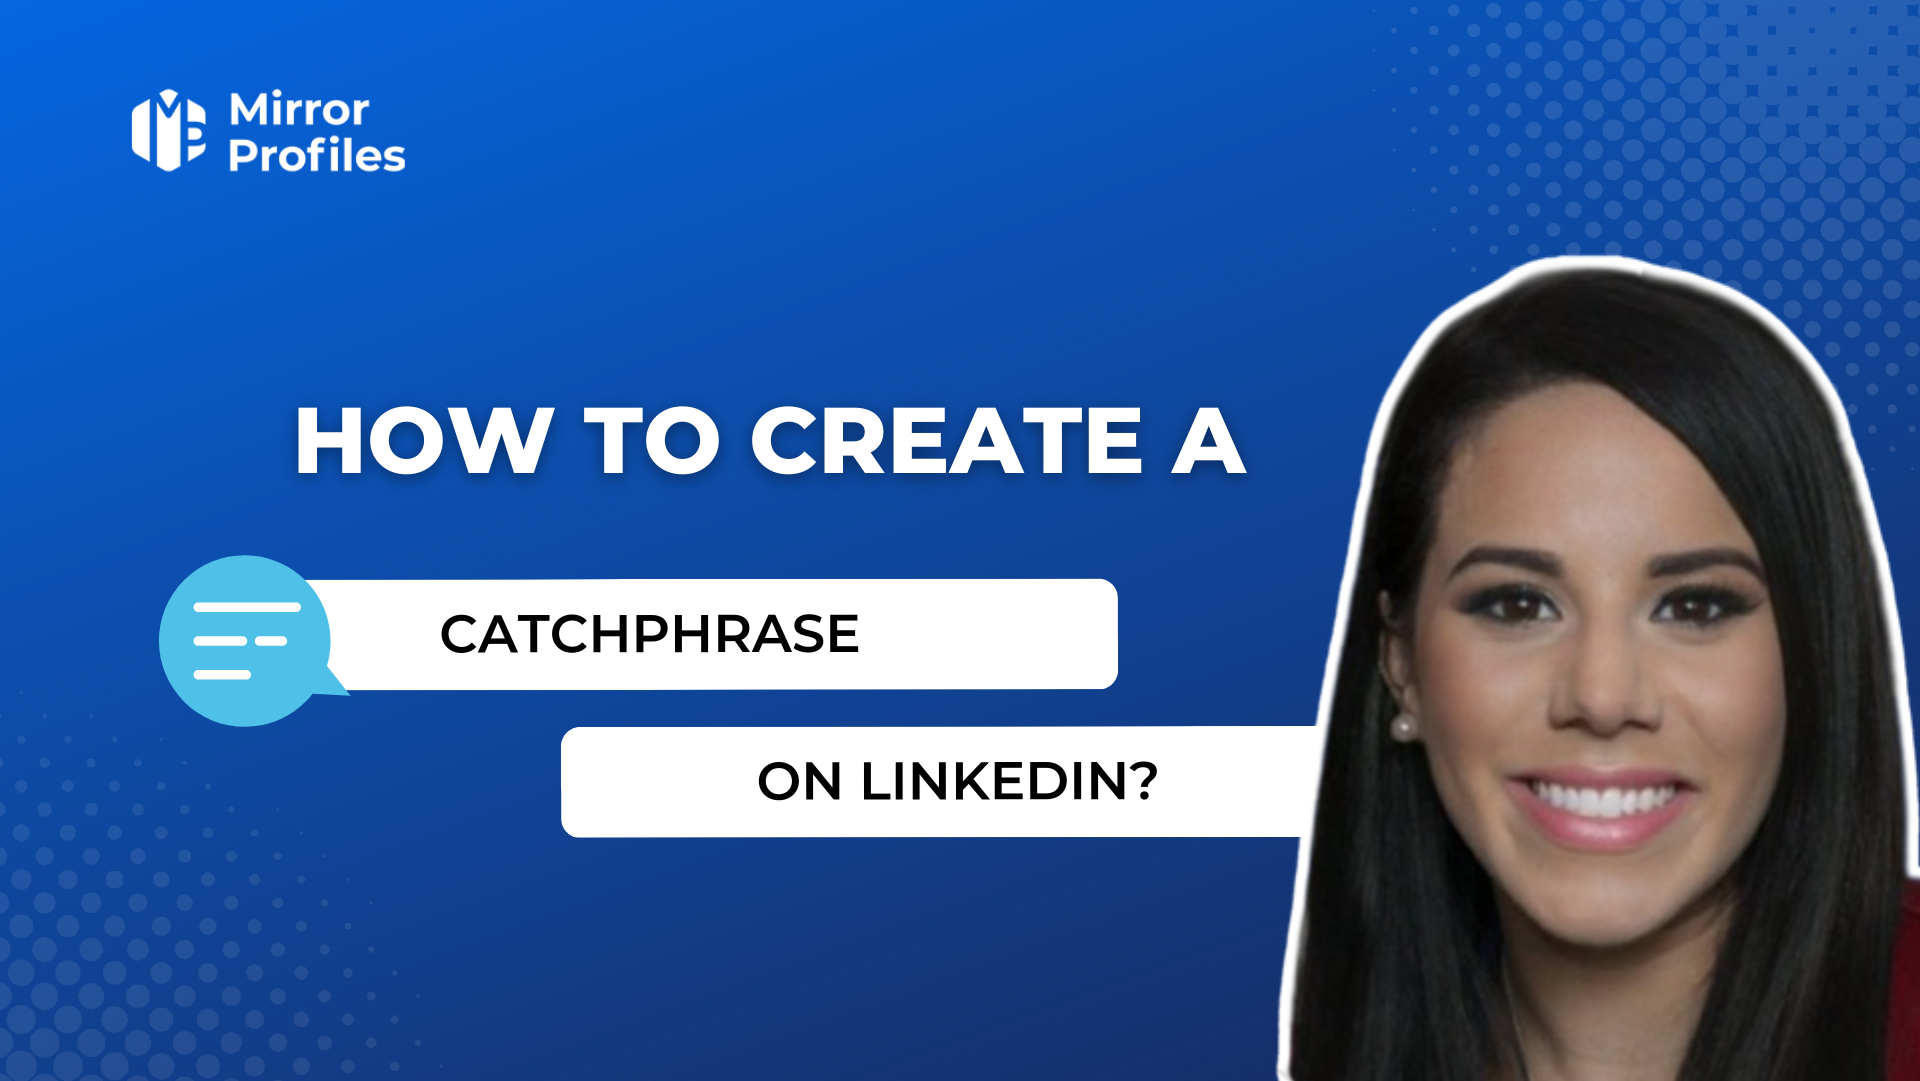 How to create a catchphrase on LinkedIn?